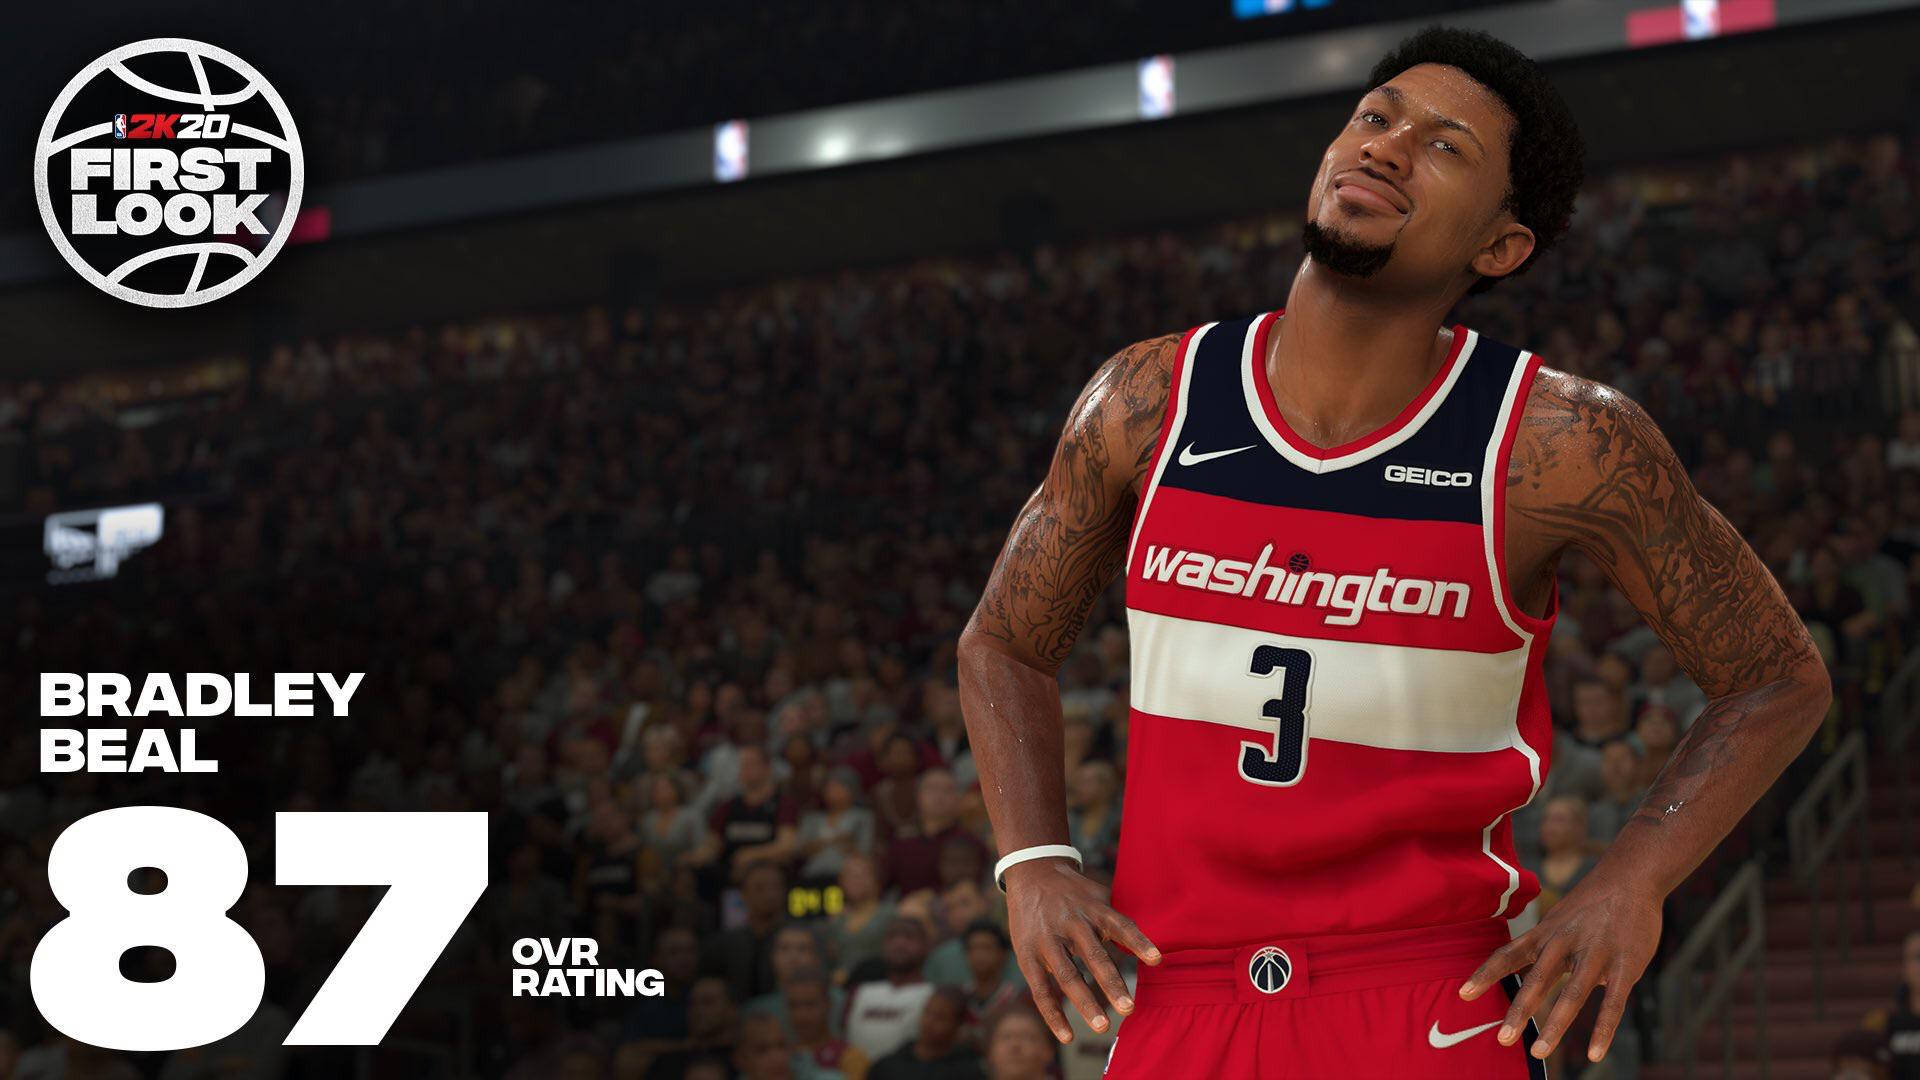 Bradley Beal 2k20 Overall Rating Background